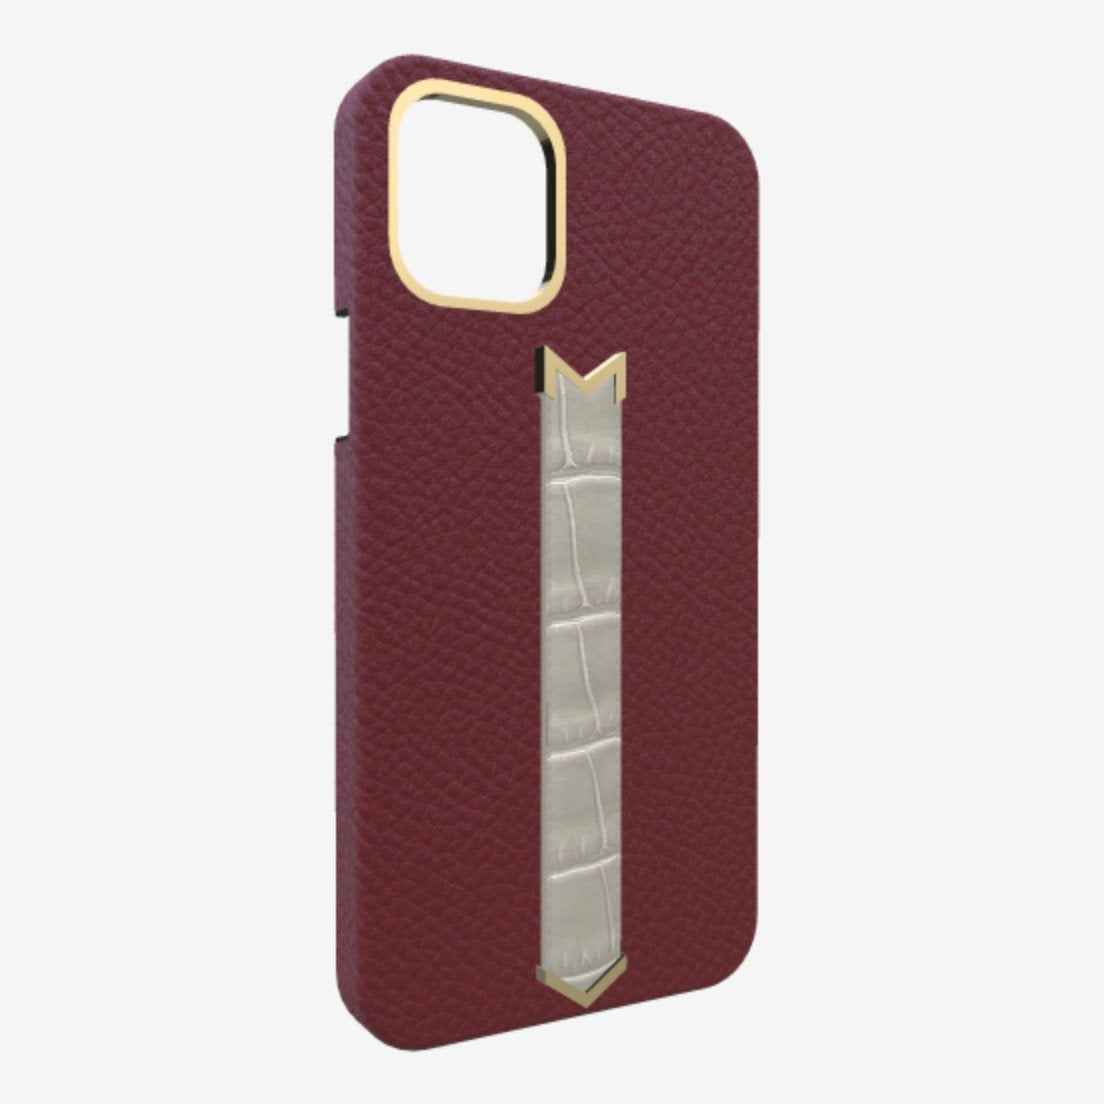 Gold Finger Strap Case for iPhone 13 Pro Max in Genuine Calfskin and Alligator Burgundy Palace Pearl Grey 